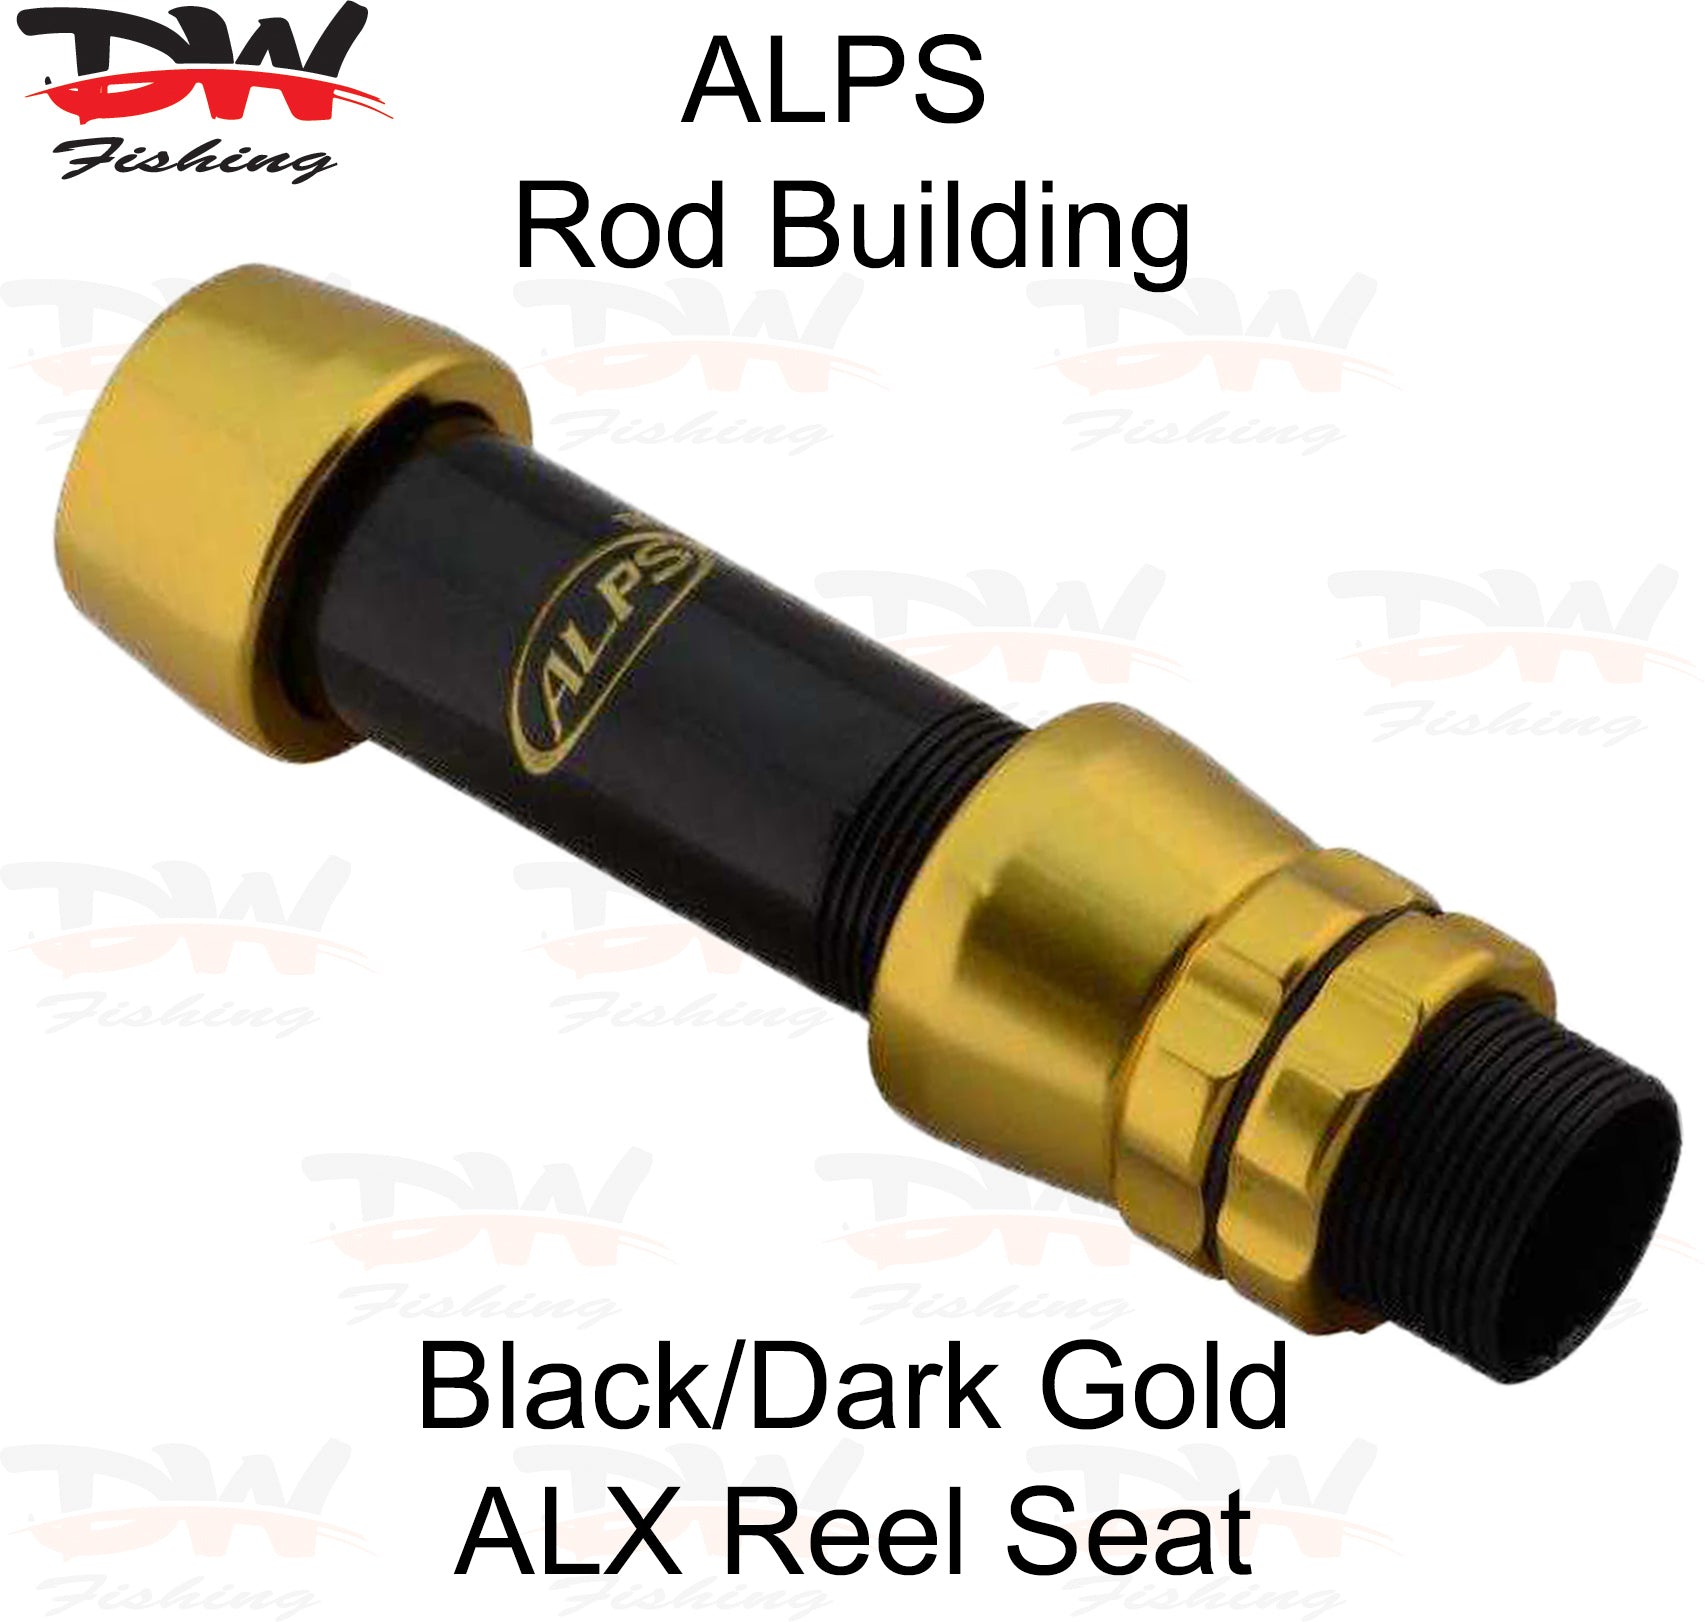 ALPS ALX Alloy Reel seat black and dark gold colour salt water reel seat